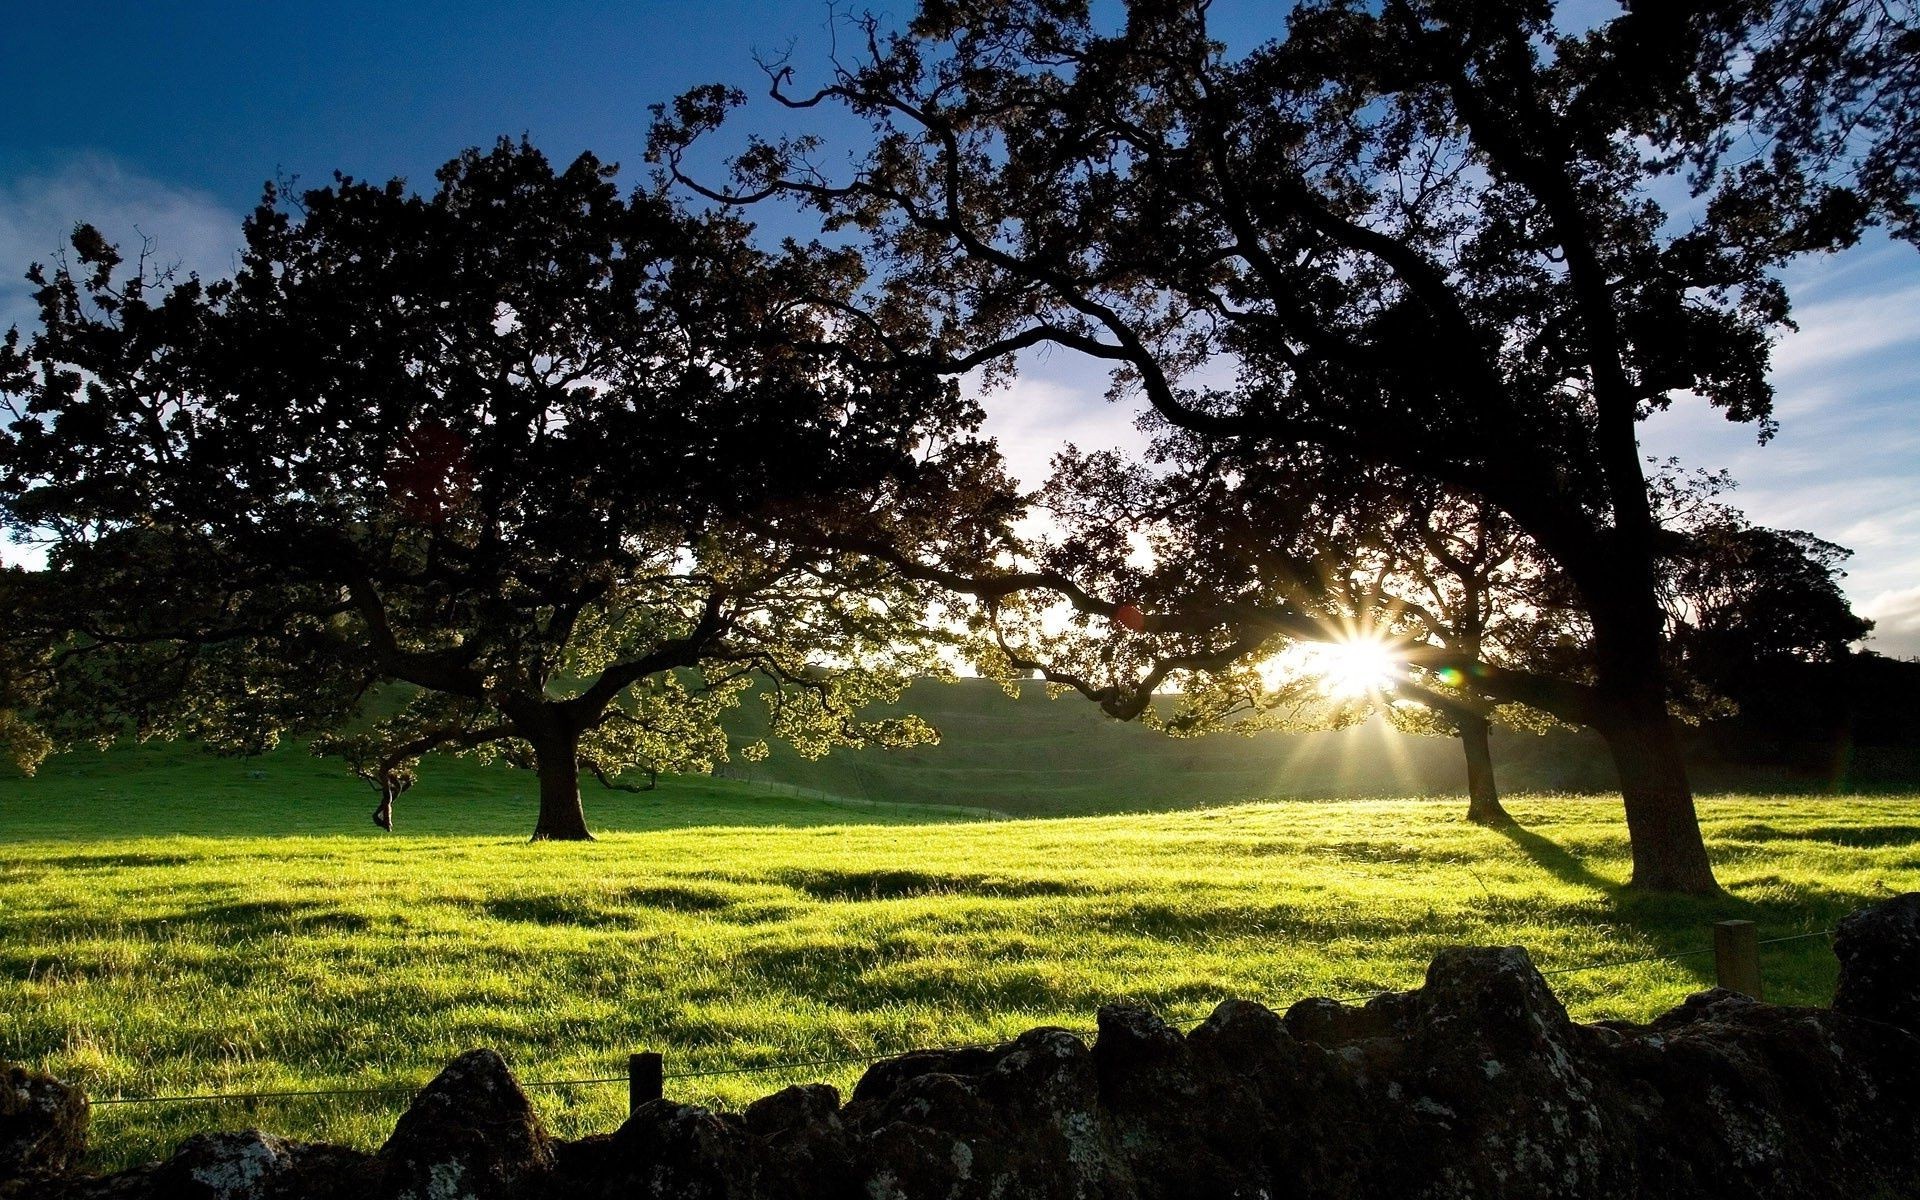 the sunset and sunrise landscape tree grass nature sun outdoors field hayfield fair weather summer countryside rural dawn sky park